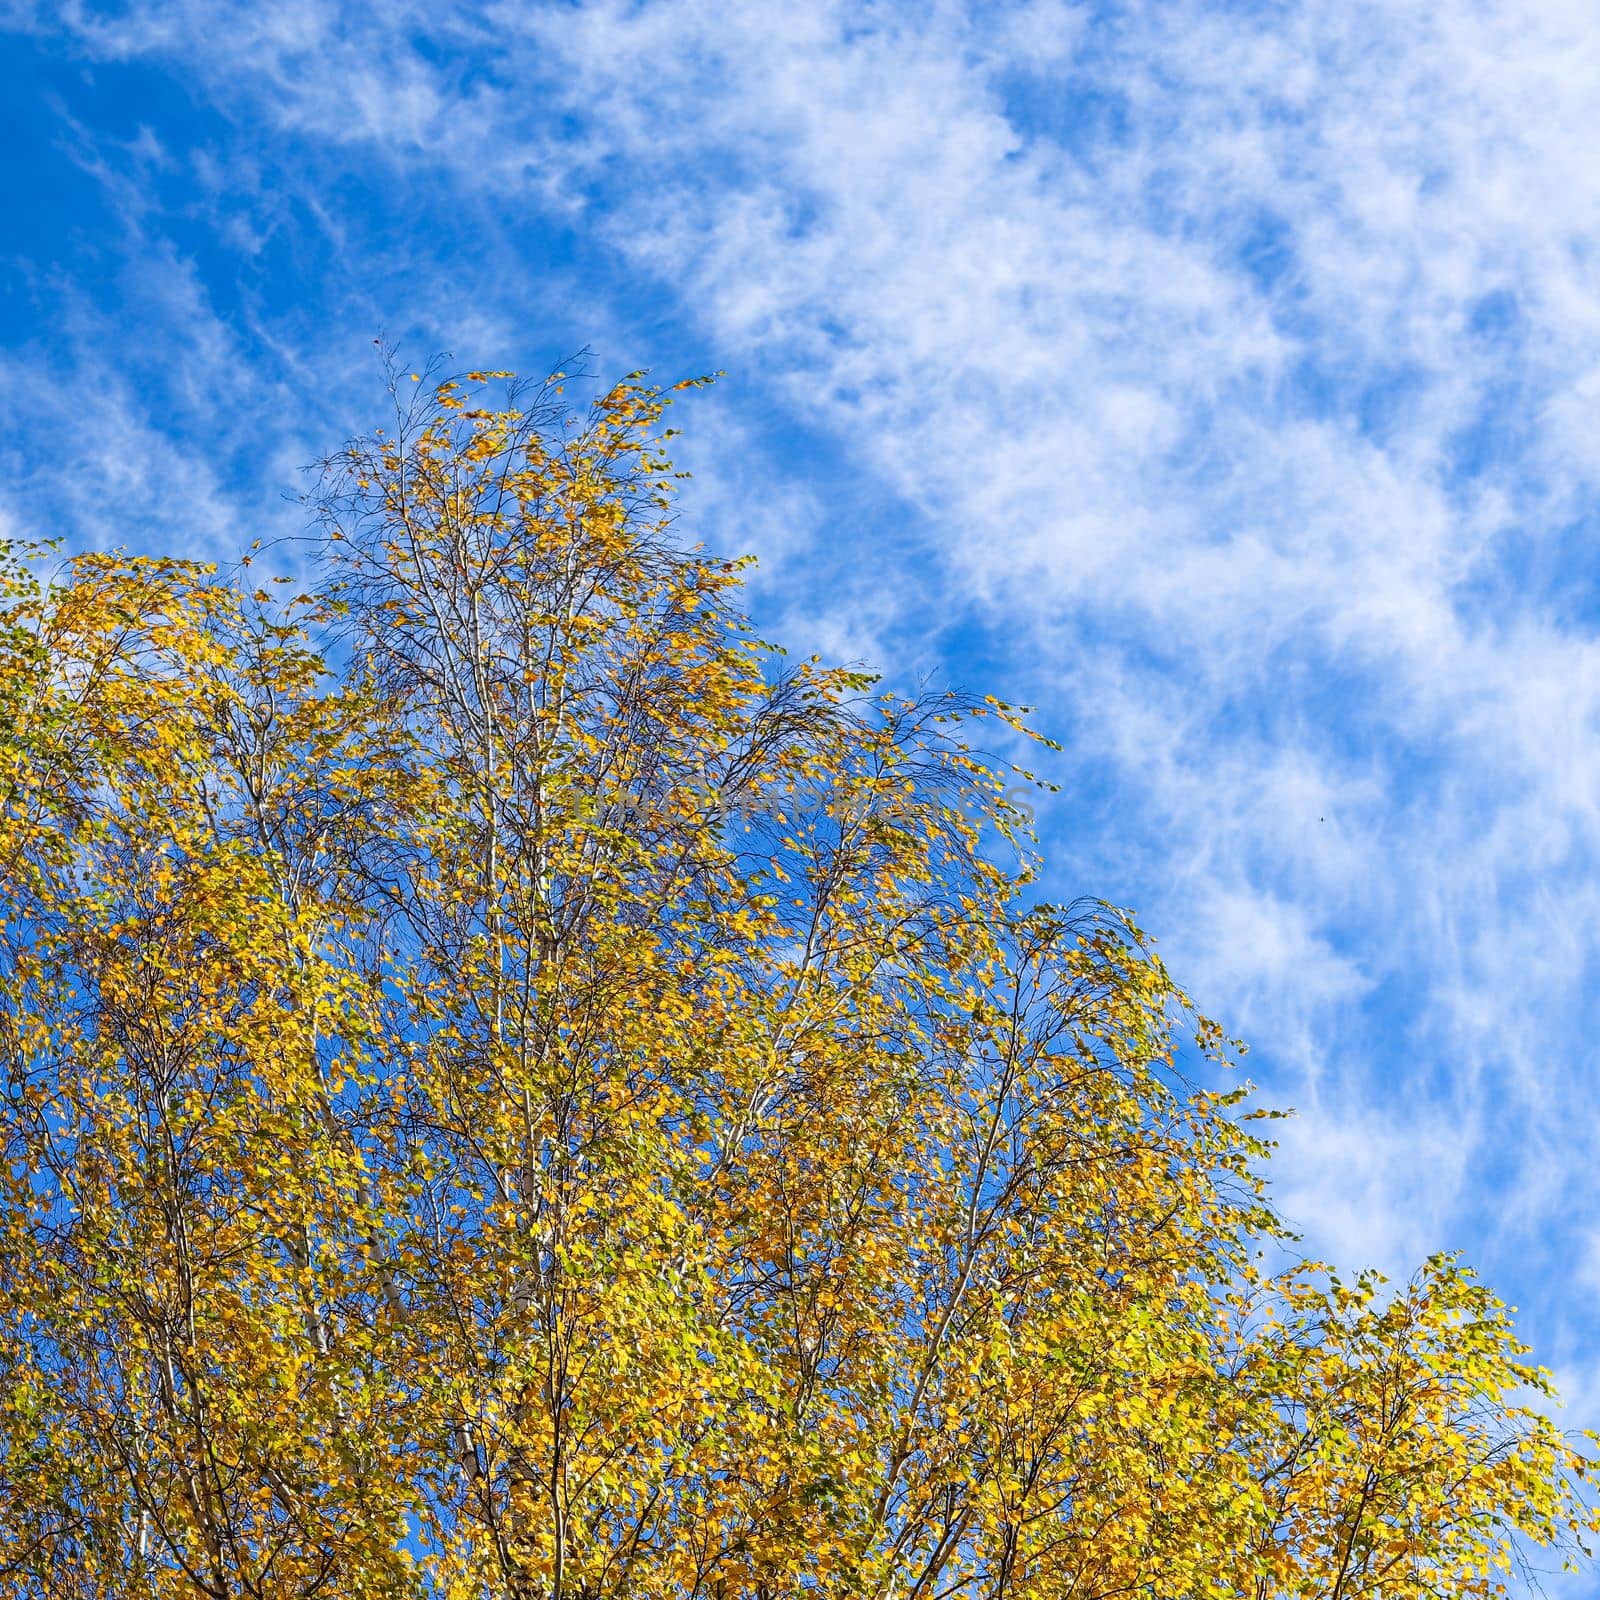 Autumn background. Bright yellow leaves on birch branches against blue sky with clouds